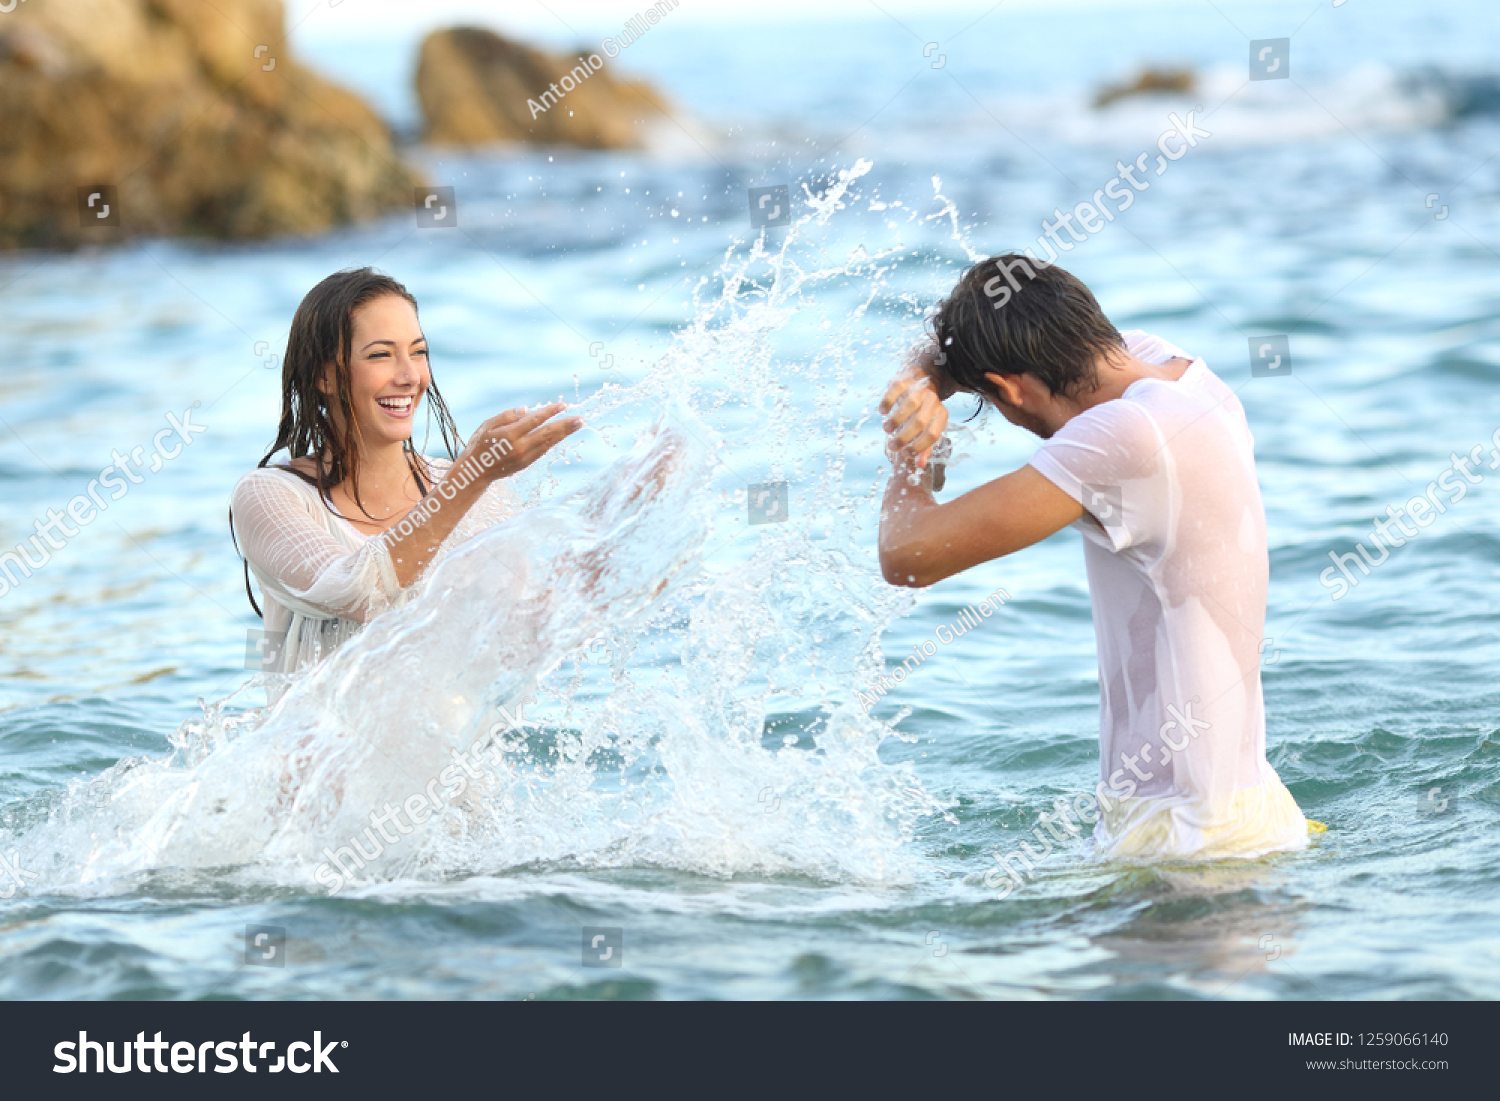 Spontaneous couple joking throwing water bathing in the sea on the beach #1259066140